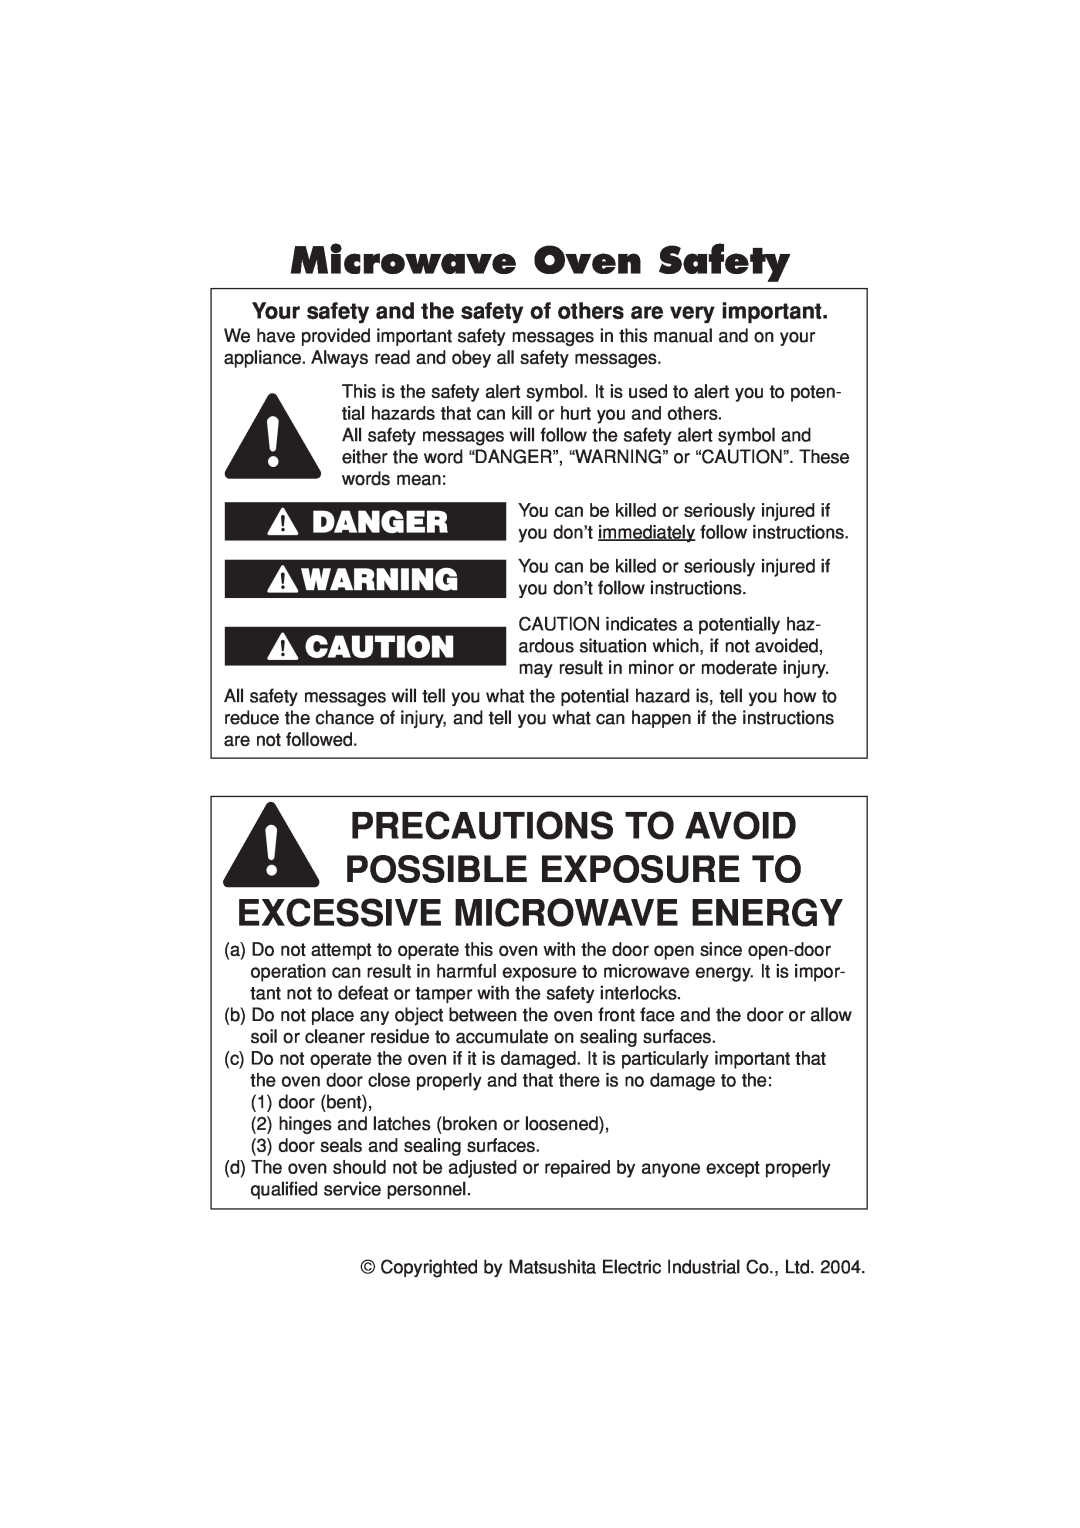 Panasonic NN-H624 Excessive Microwave Energy, Precautions To Avoid Possible Exposure To, Danger, Microwave Oven Safety 